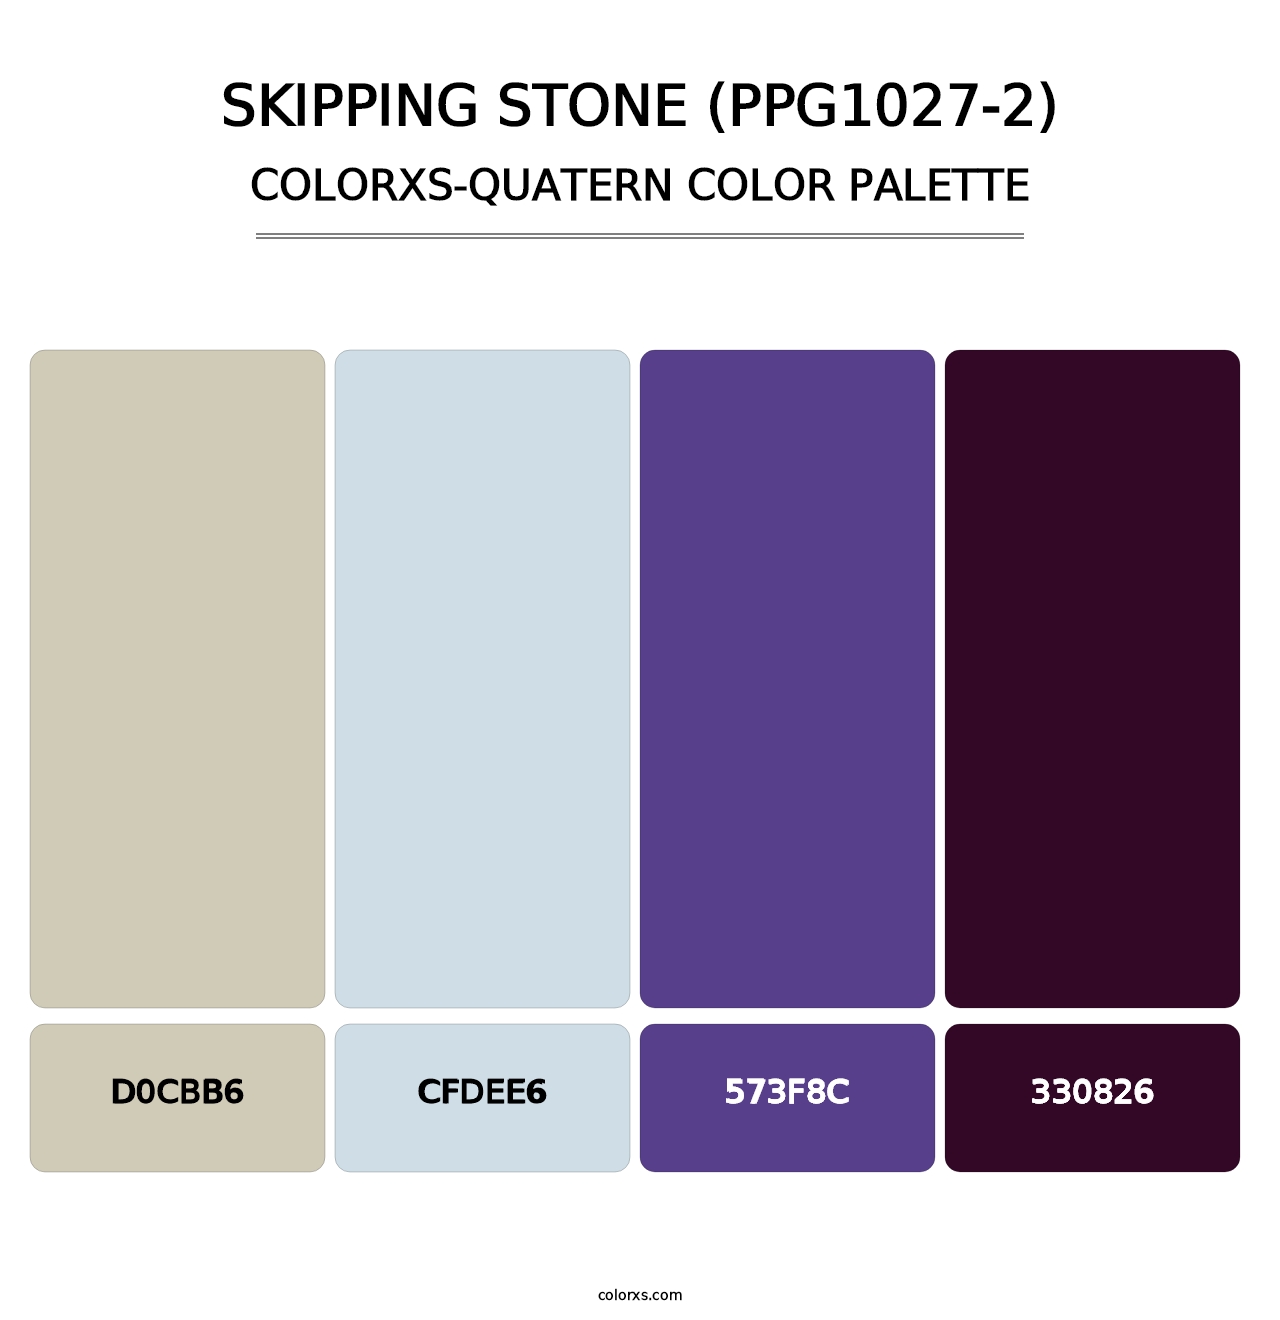 Skipping Stone (PPG1027-2) - Colorxs Quatern Palette